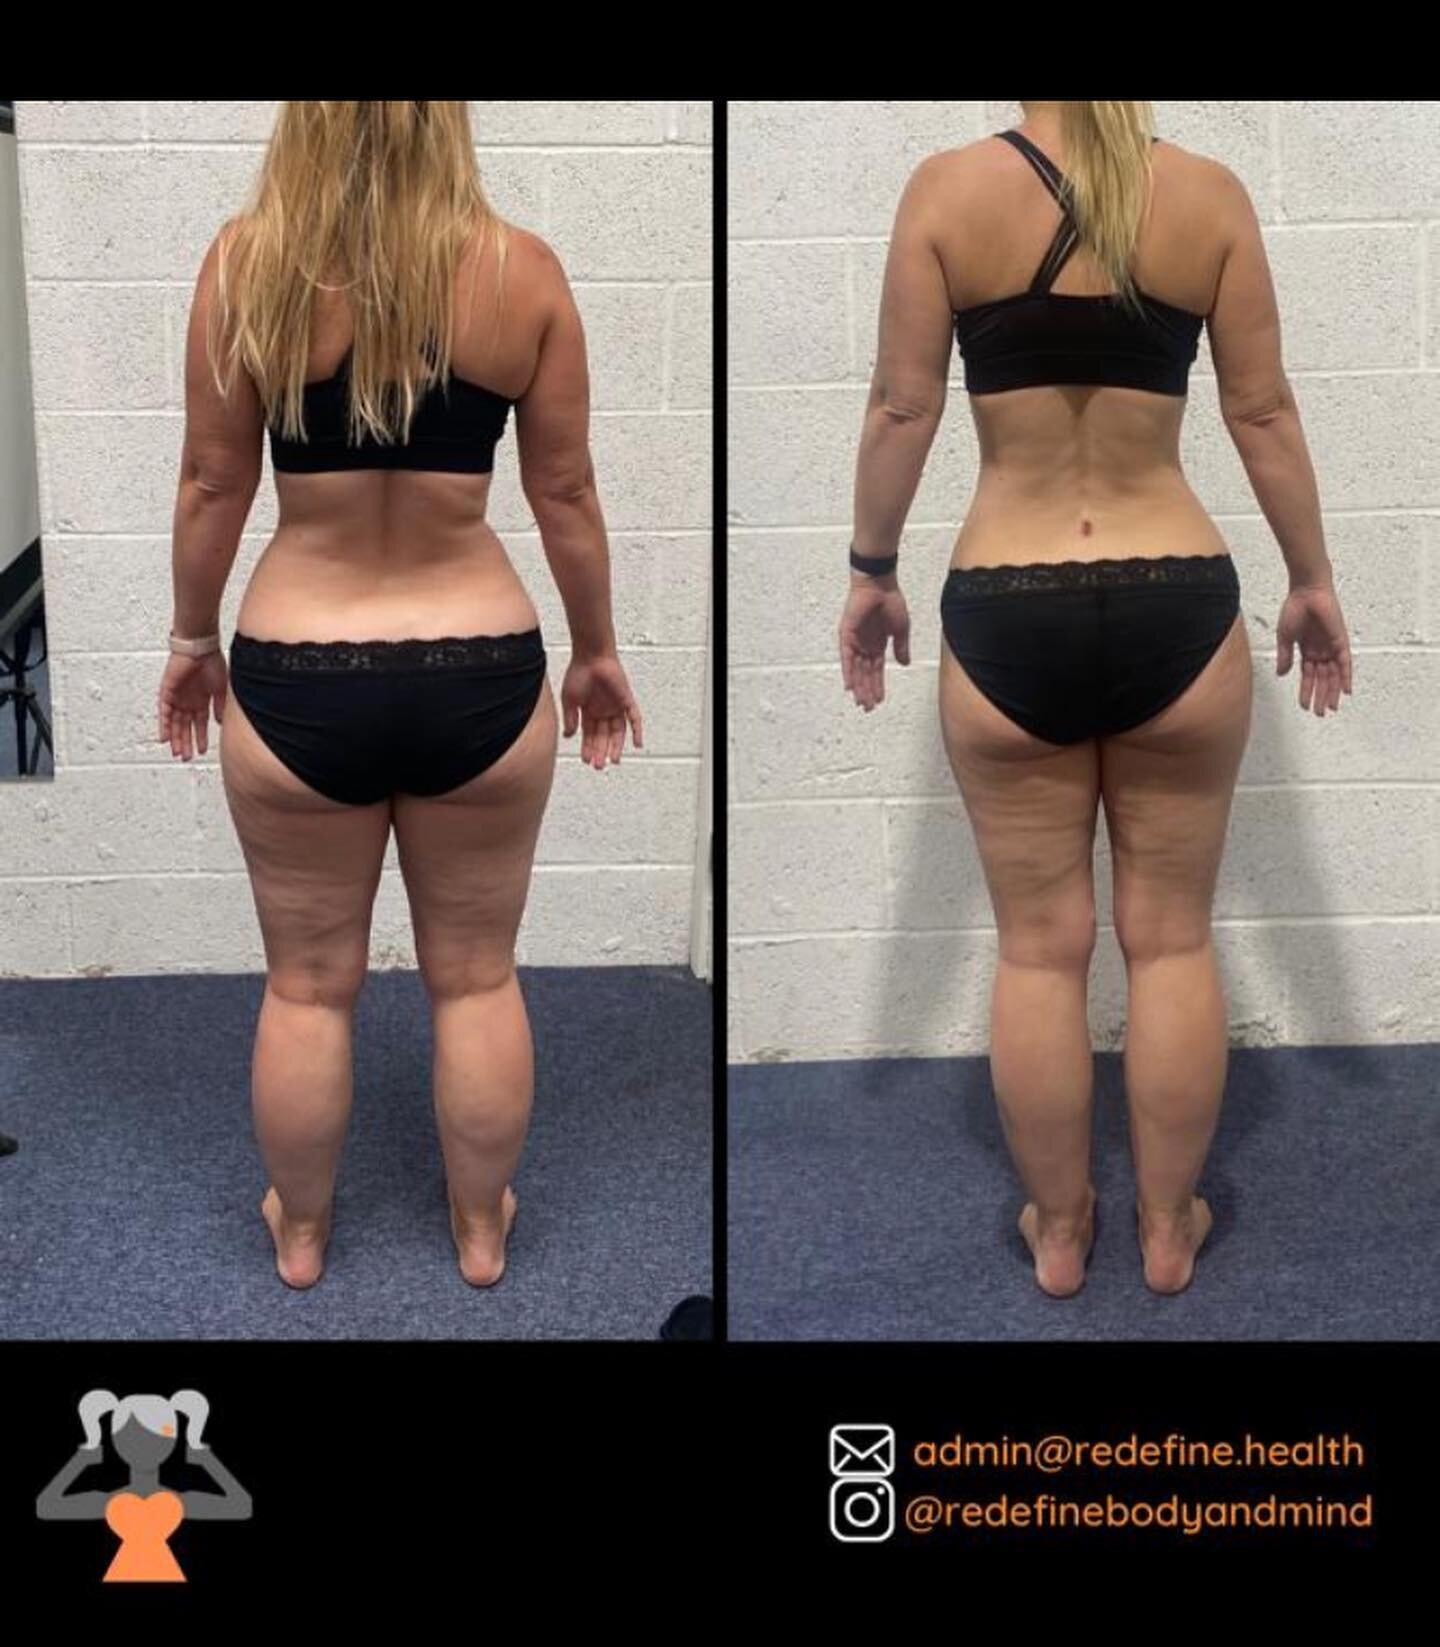 Next up in the series of our incredible &rsquo;REDEFINE YOURSELF&rsquo; 12 Week Challenge team is a lady who wants to remain anonymous for now. 

However, these before and redefine&rsquo; pictures tell the story perfect without you knowing her name! 